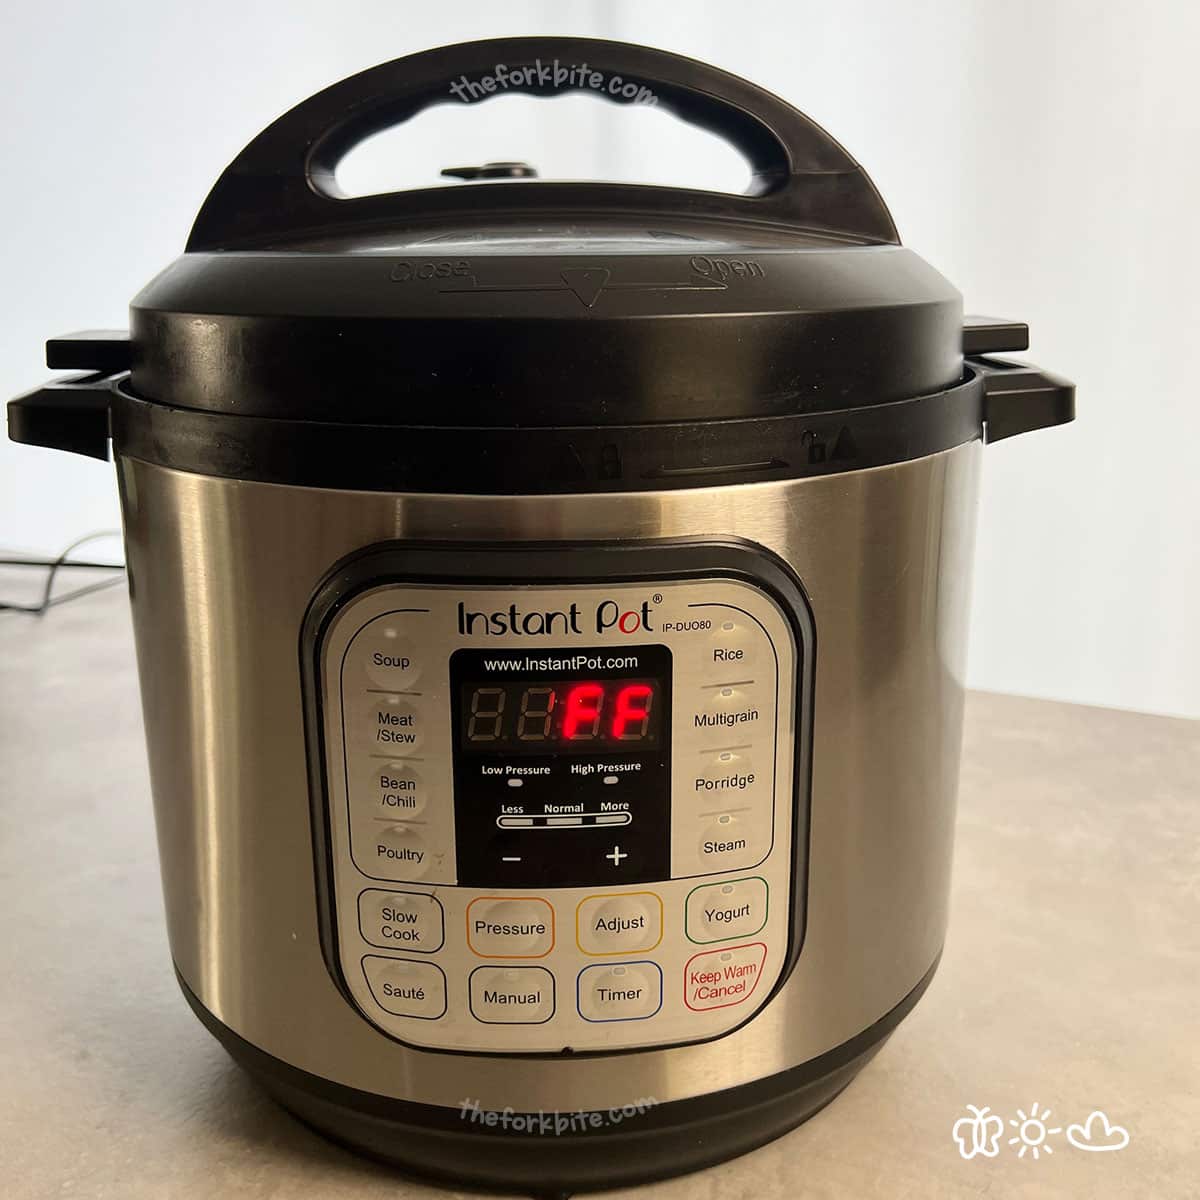 One common issue that people experience is when their pot gets stuck on preheating and they can't seem to get it to work properly. Luckily, there are a few tricks that you can use to help fix this problem.